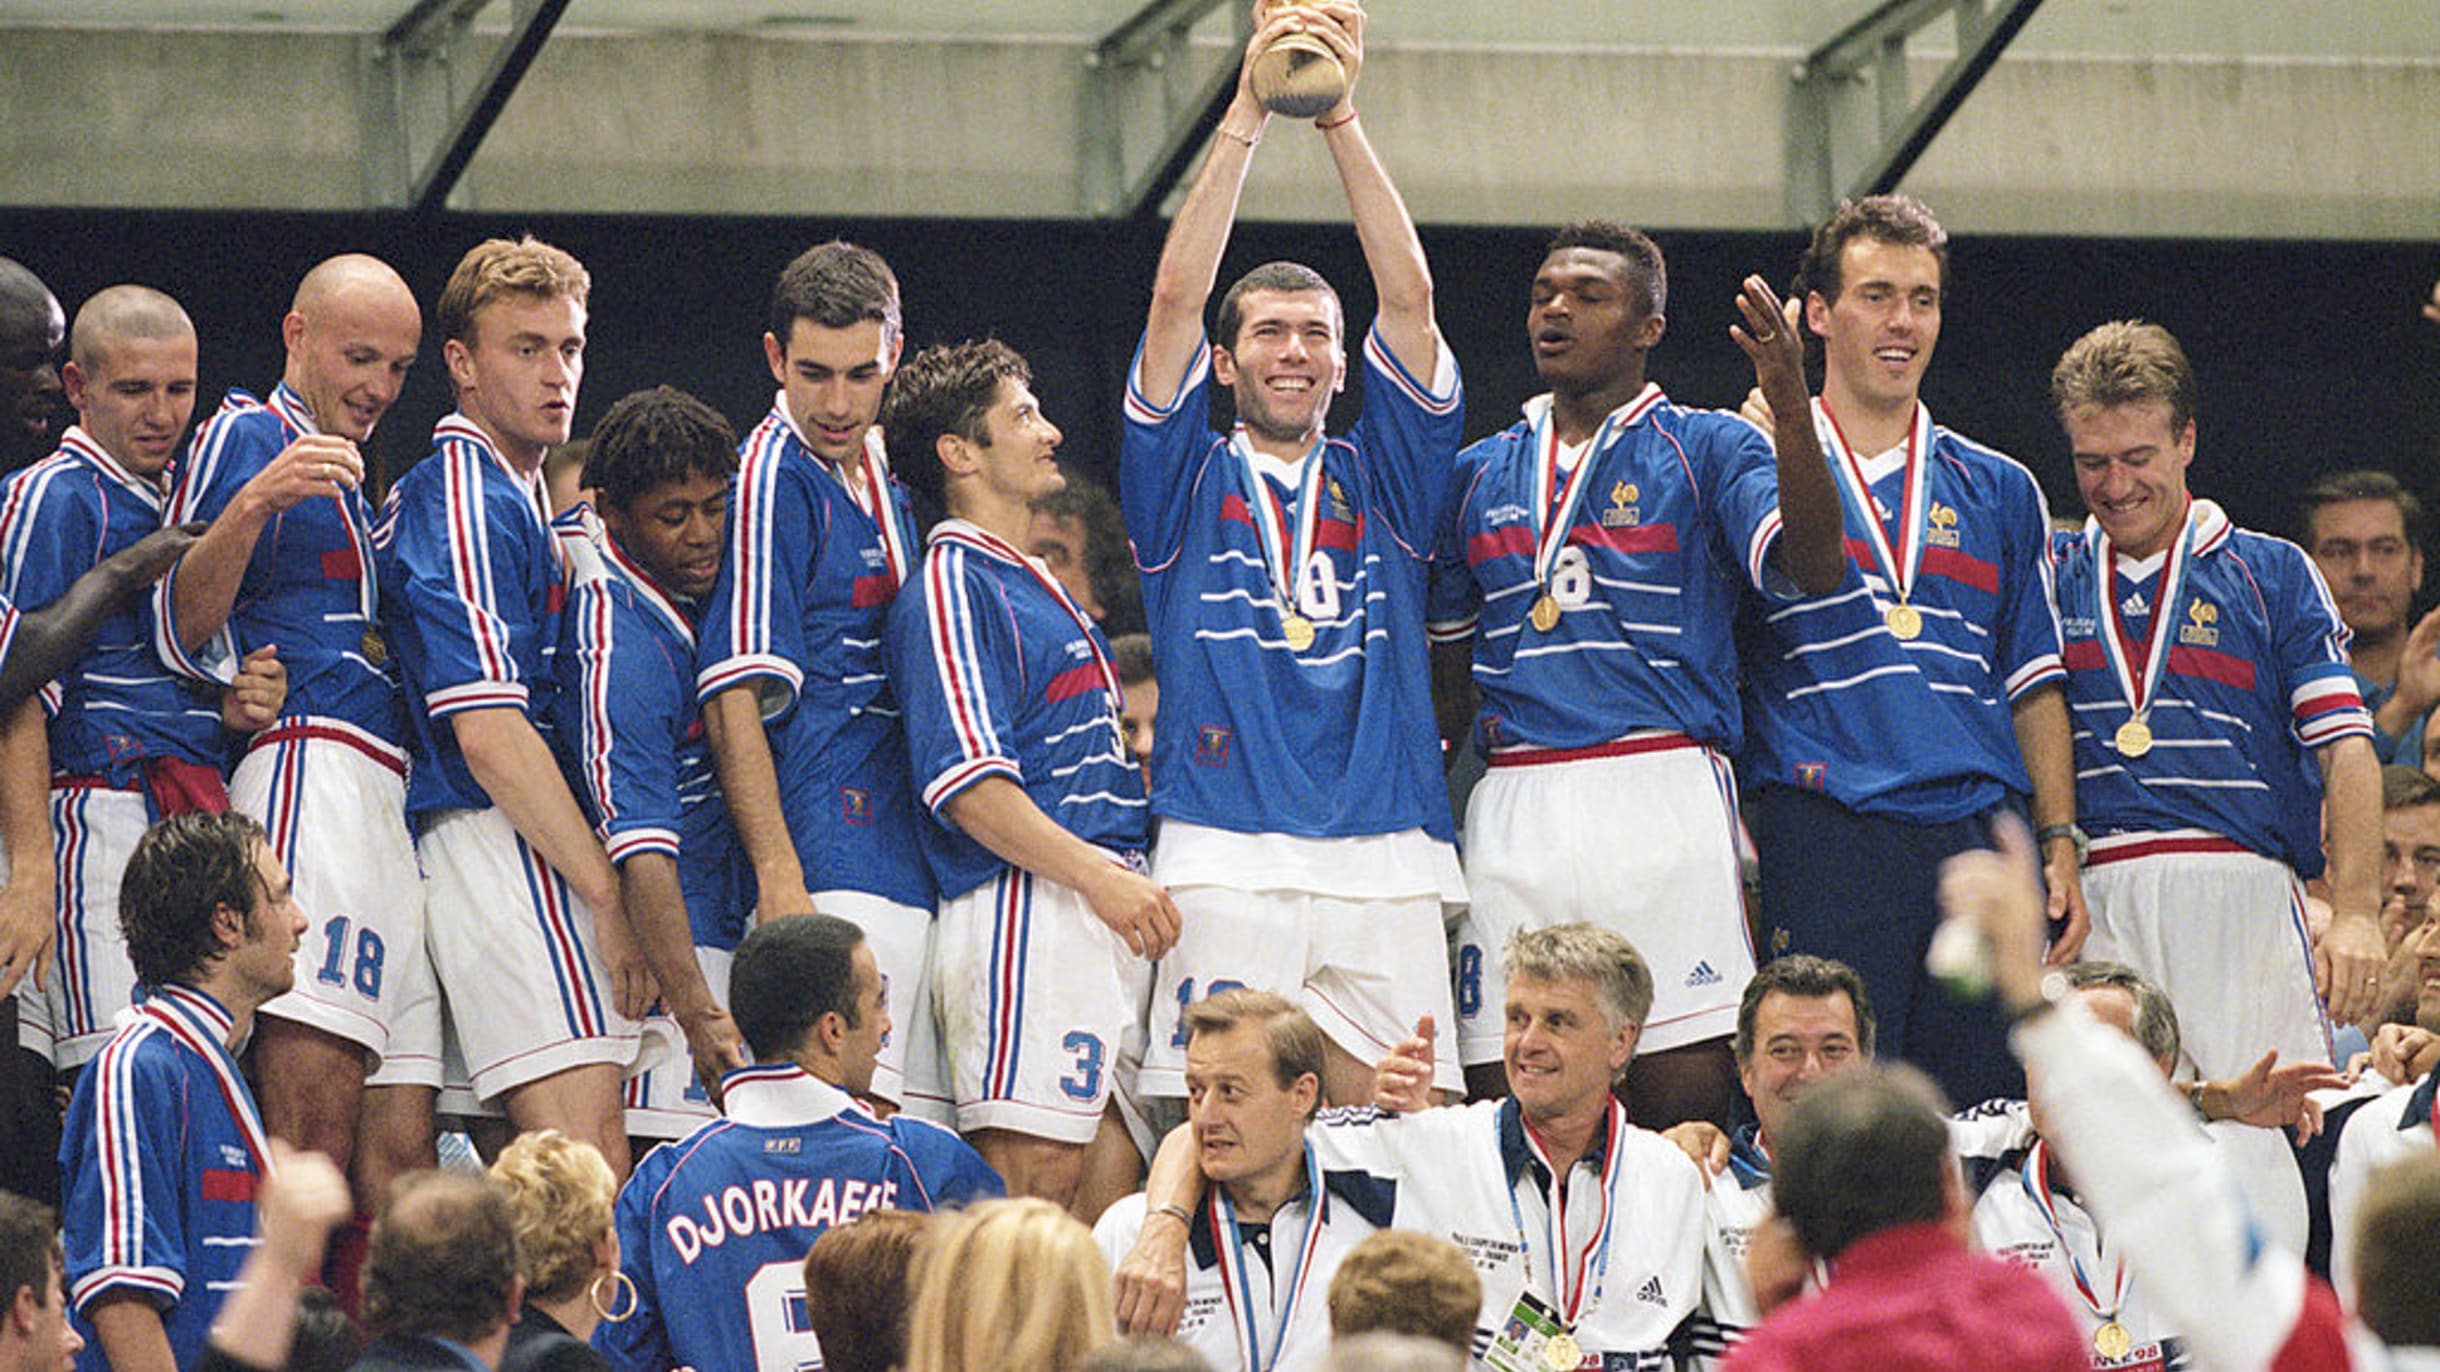 How times has France won the Cup